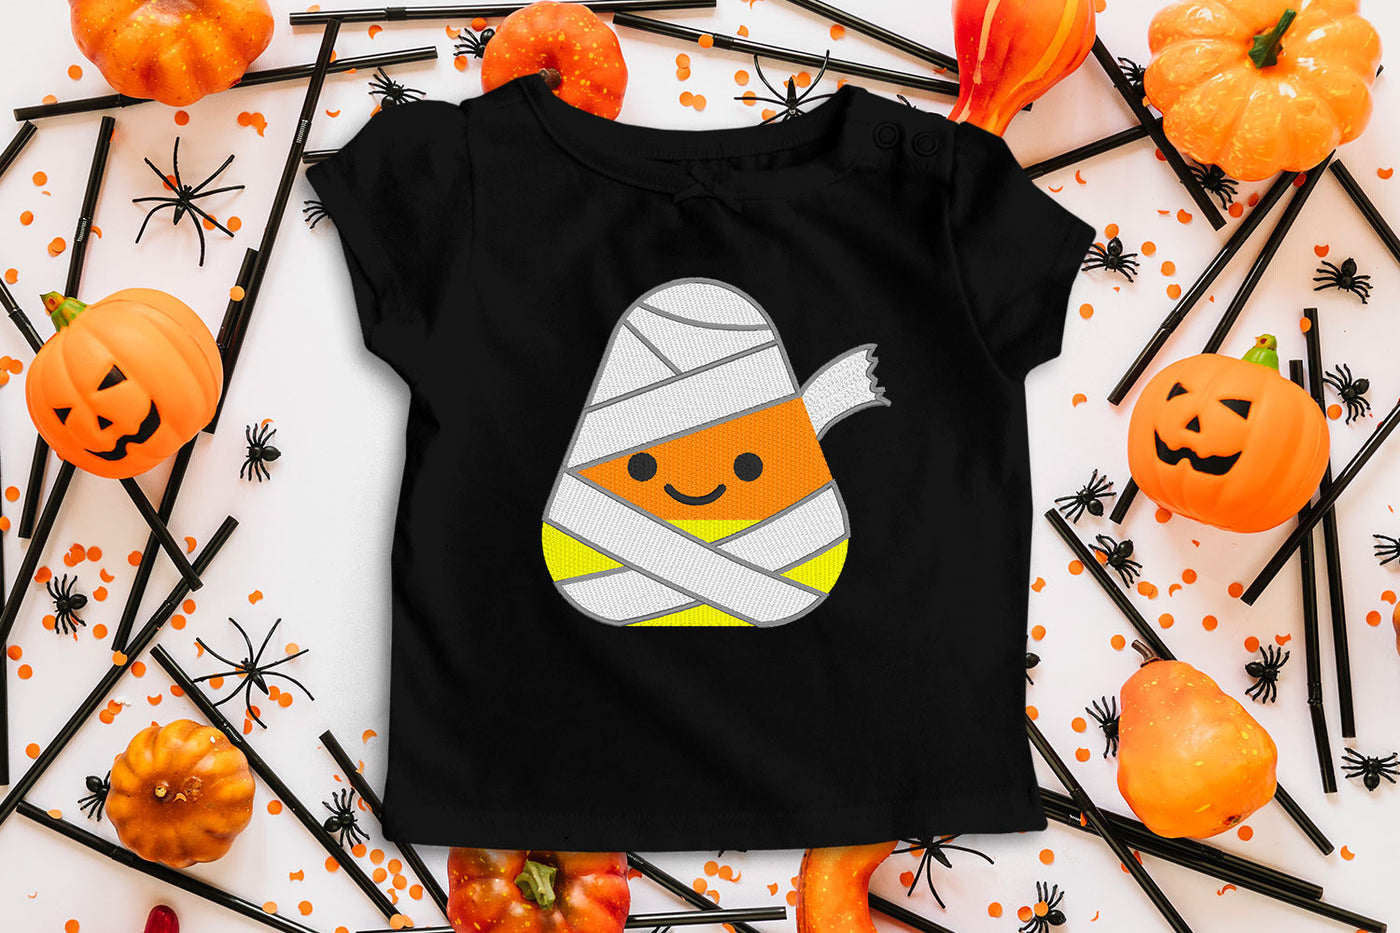 candy corn dressed as Mummy embroidery design file